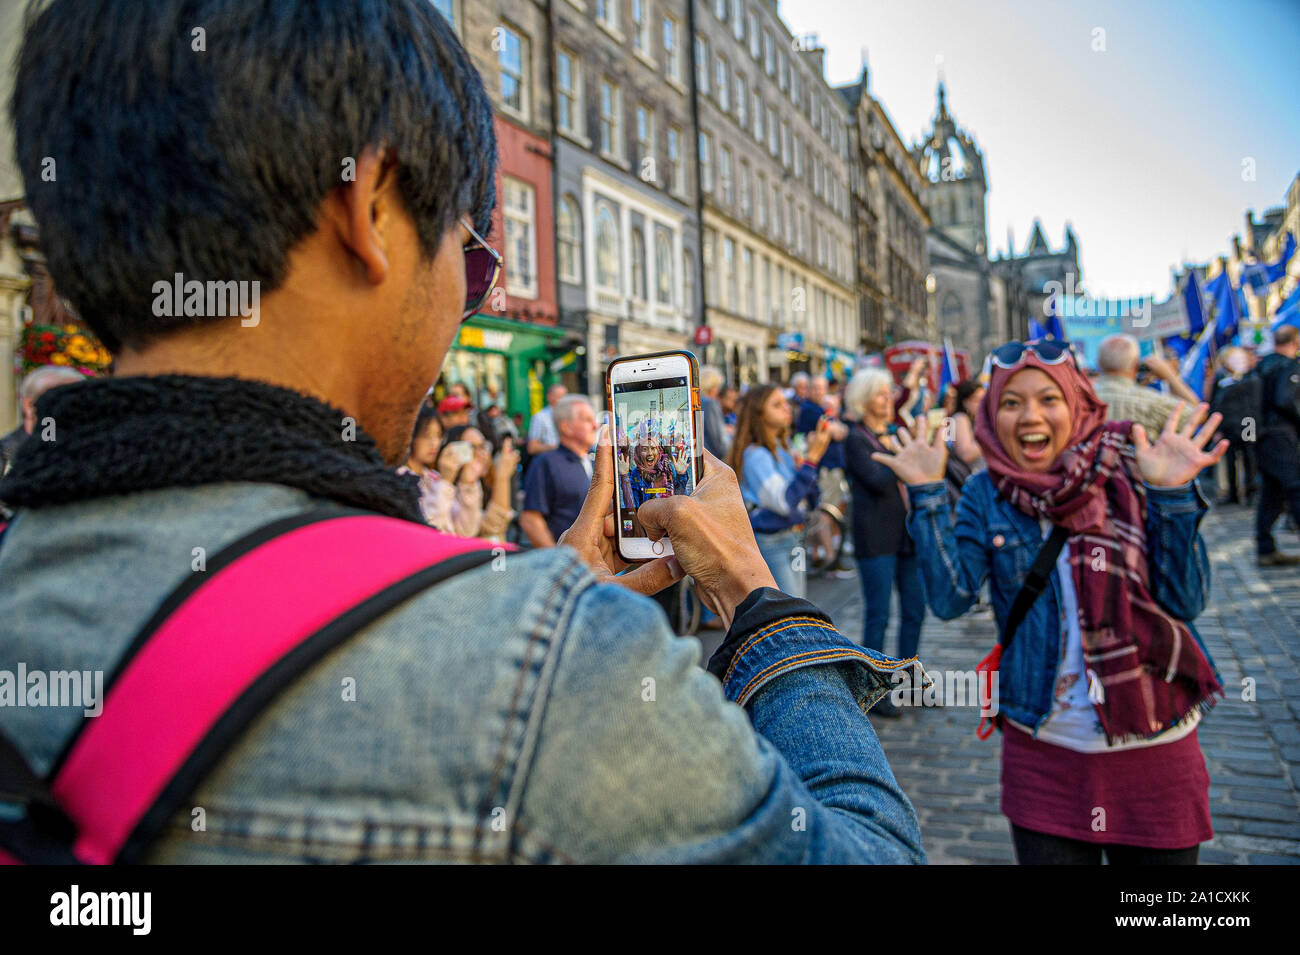 Bystanders are seen taking photos of the protesters on their phones during the demonstration.Organized by European Movement in Scotland as well as Edinburgh For Europe, protesters took to the streets of Edinburgh to demand MPs revoke Article 50 to prevent a no-deal and that the EU shares a notion to combat climate change. Stock Photo